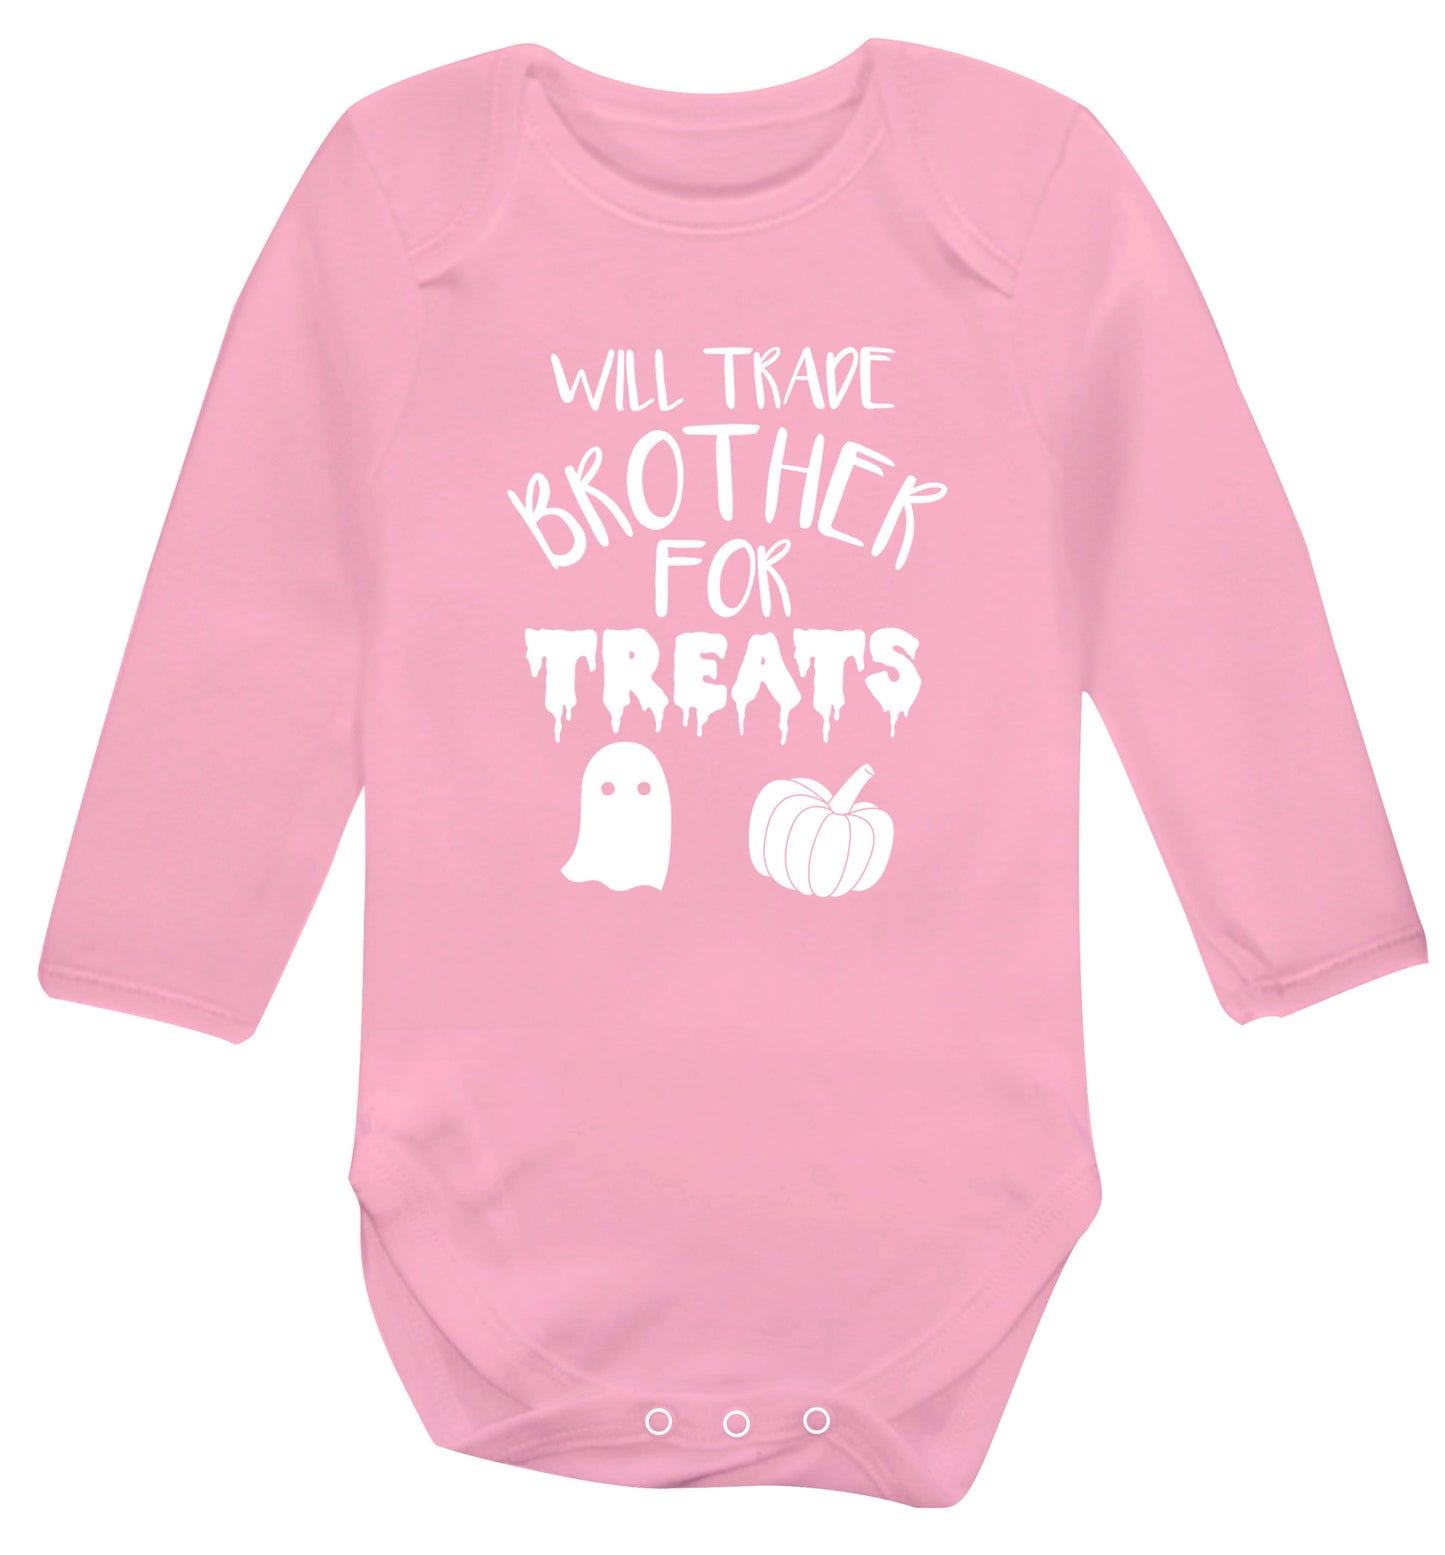 Will trade brother for treats Baby Vest long sleeved pale pink 6-12 months